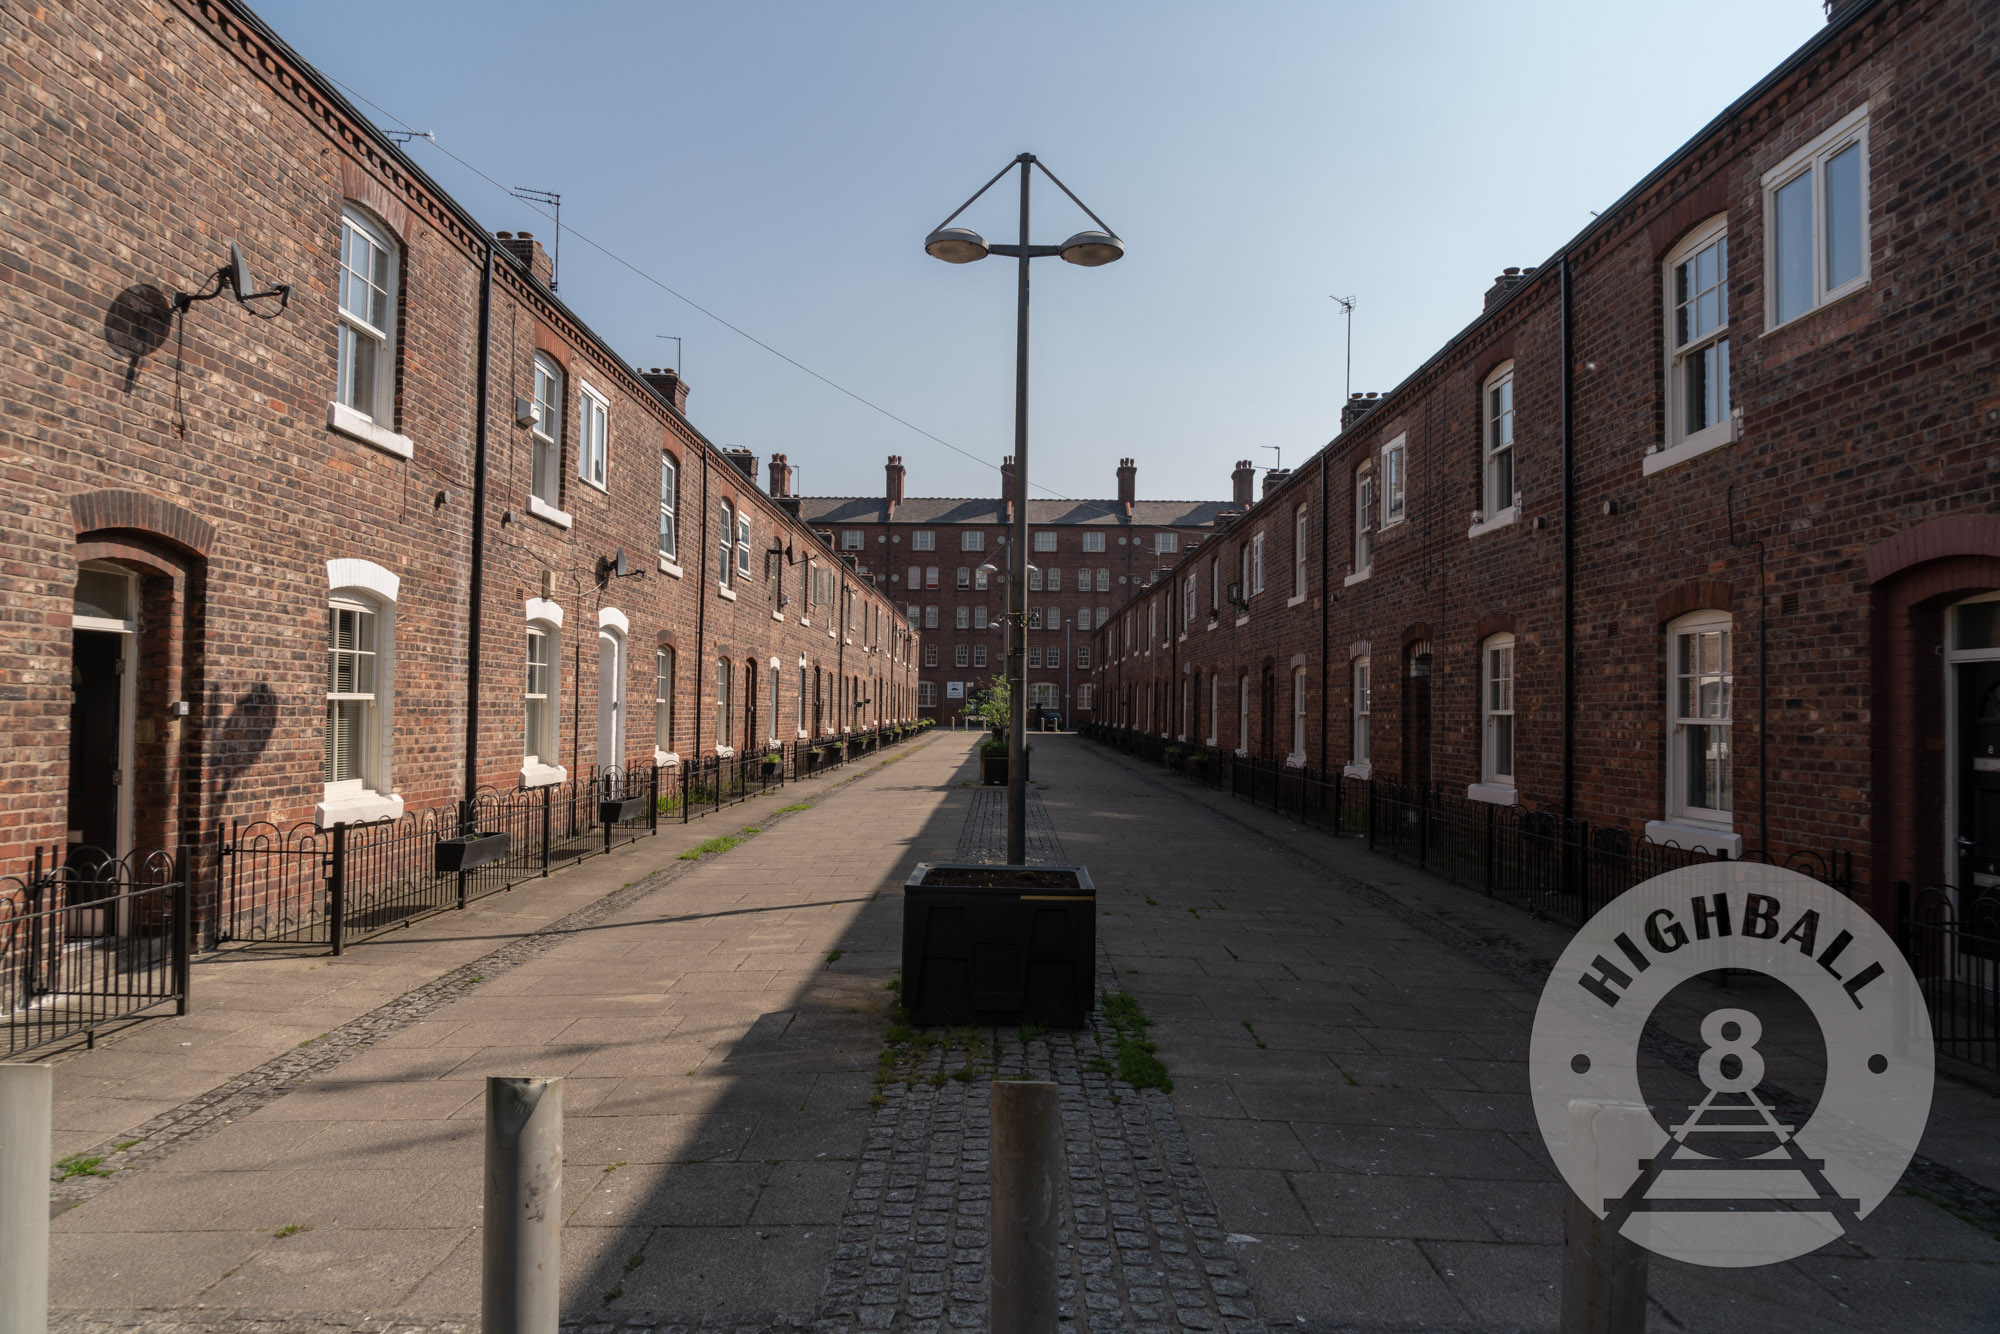 Anita Street, formerly known as Sanitary Street, Ancoats, Manchester, England, UK, 2018.